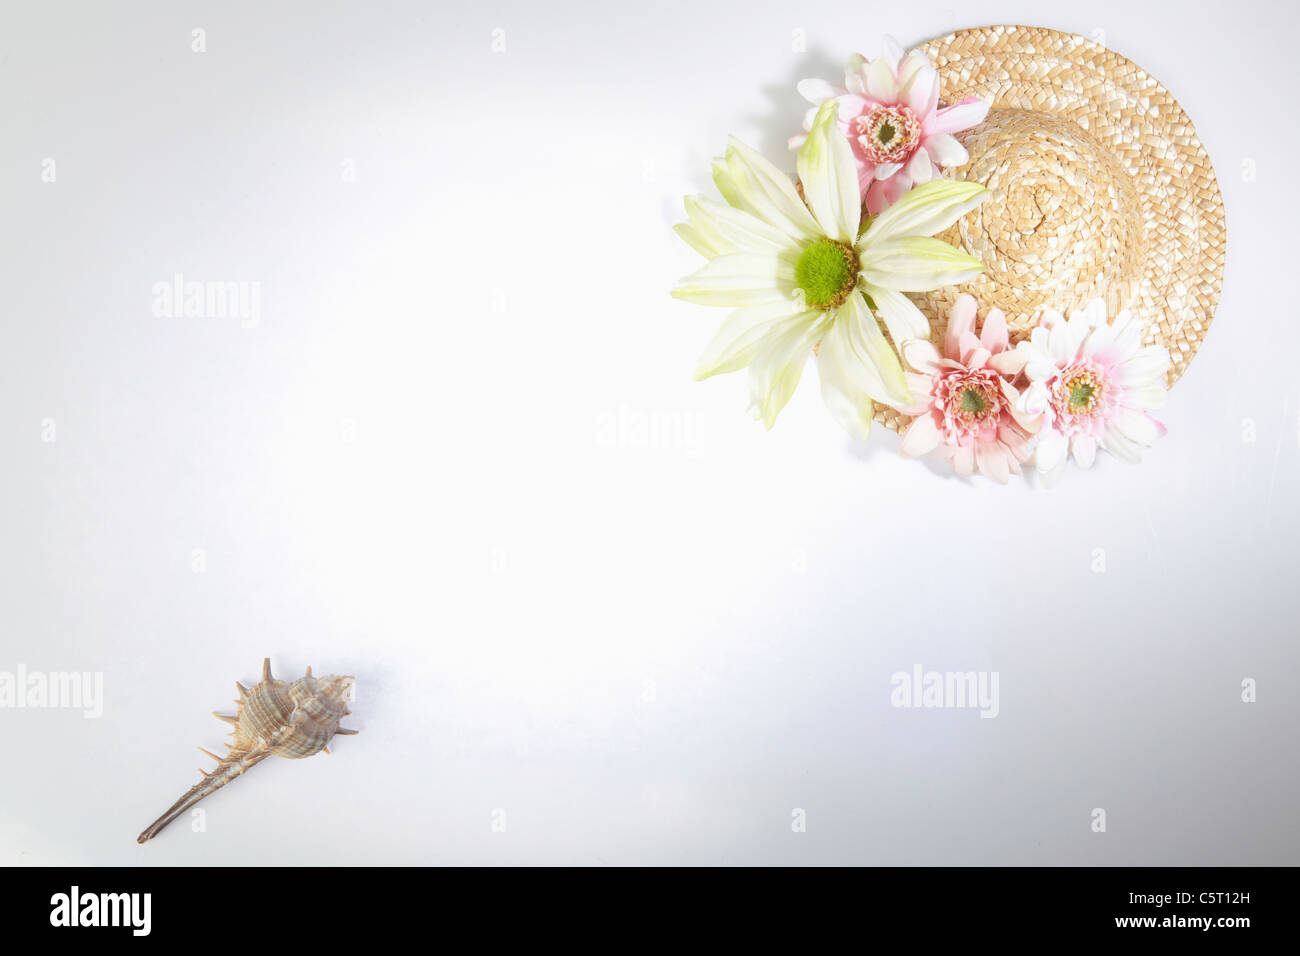 turban shell and hat with flowers Stock Photo